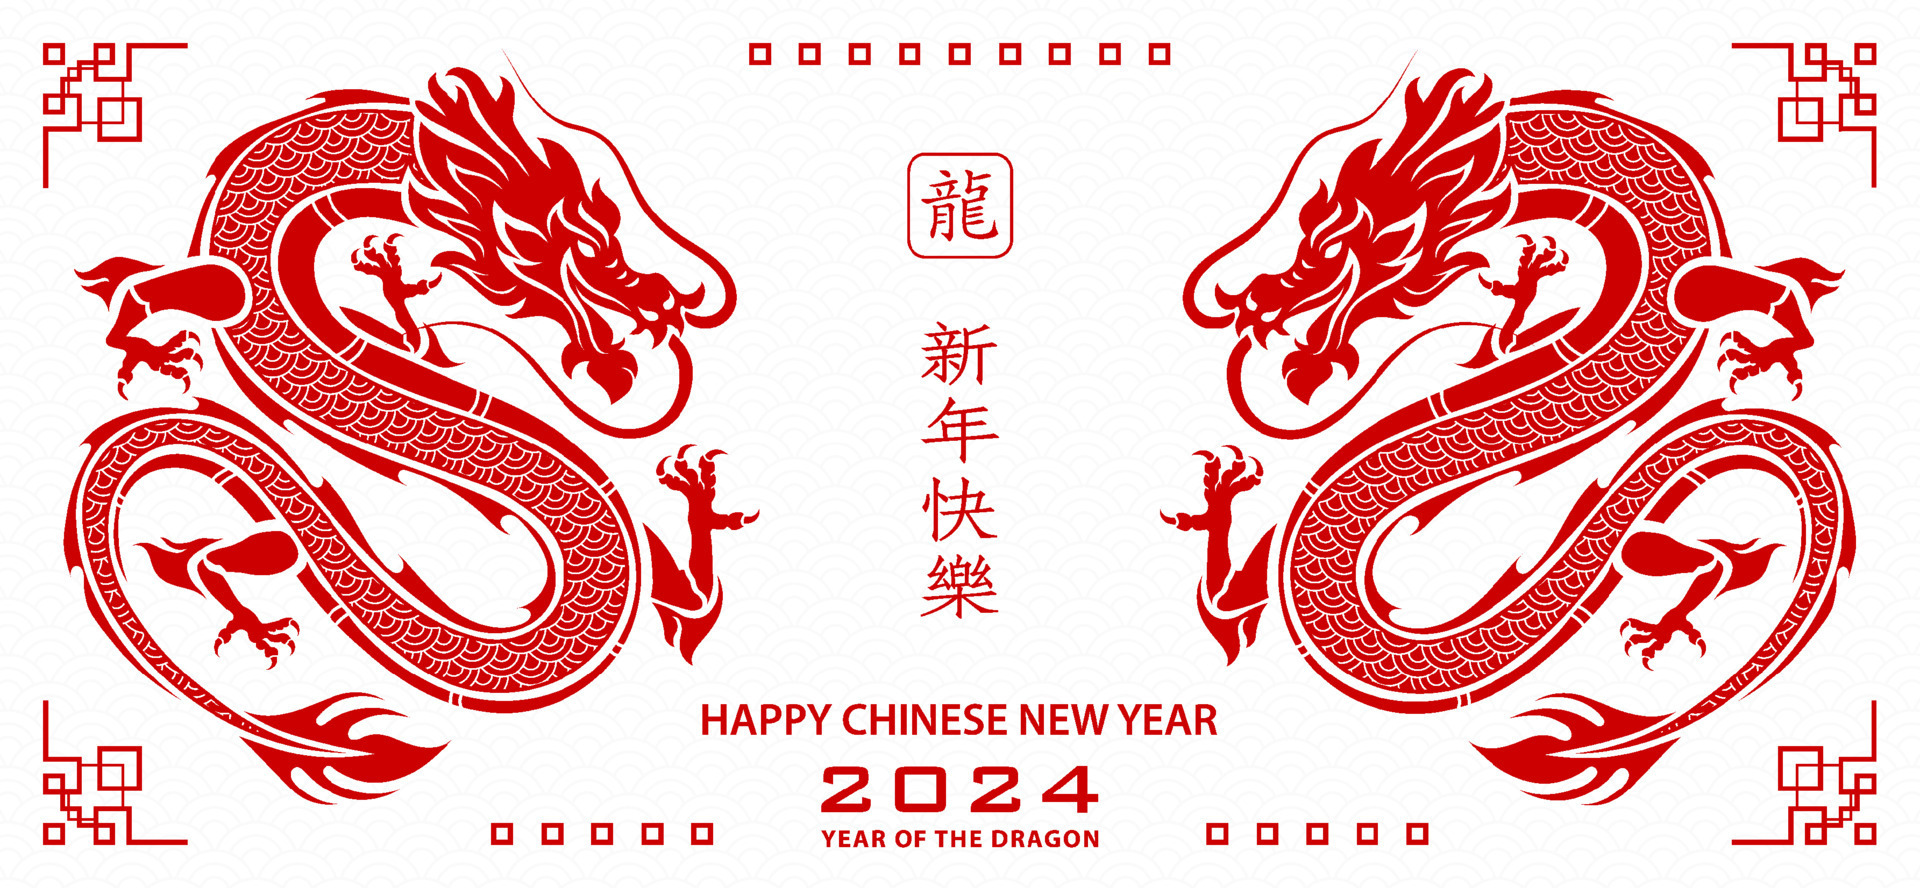 happy-chinese-new-year-2024-zodiac-sign-year-of-the-dragon-with-red